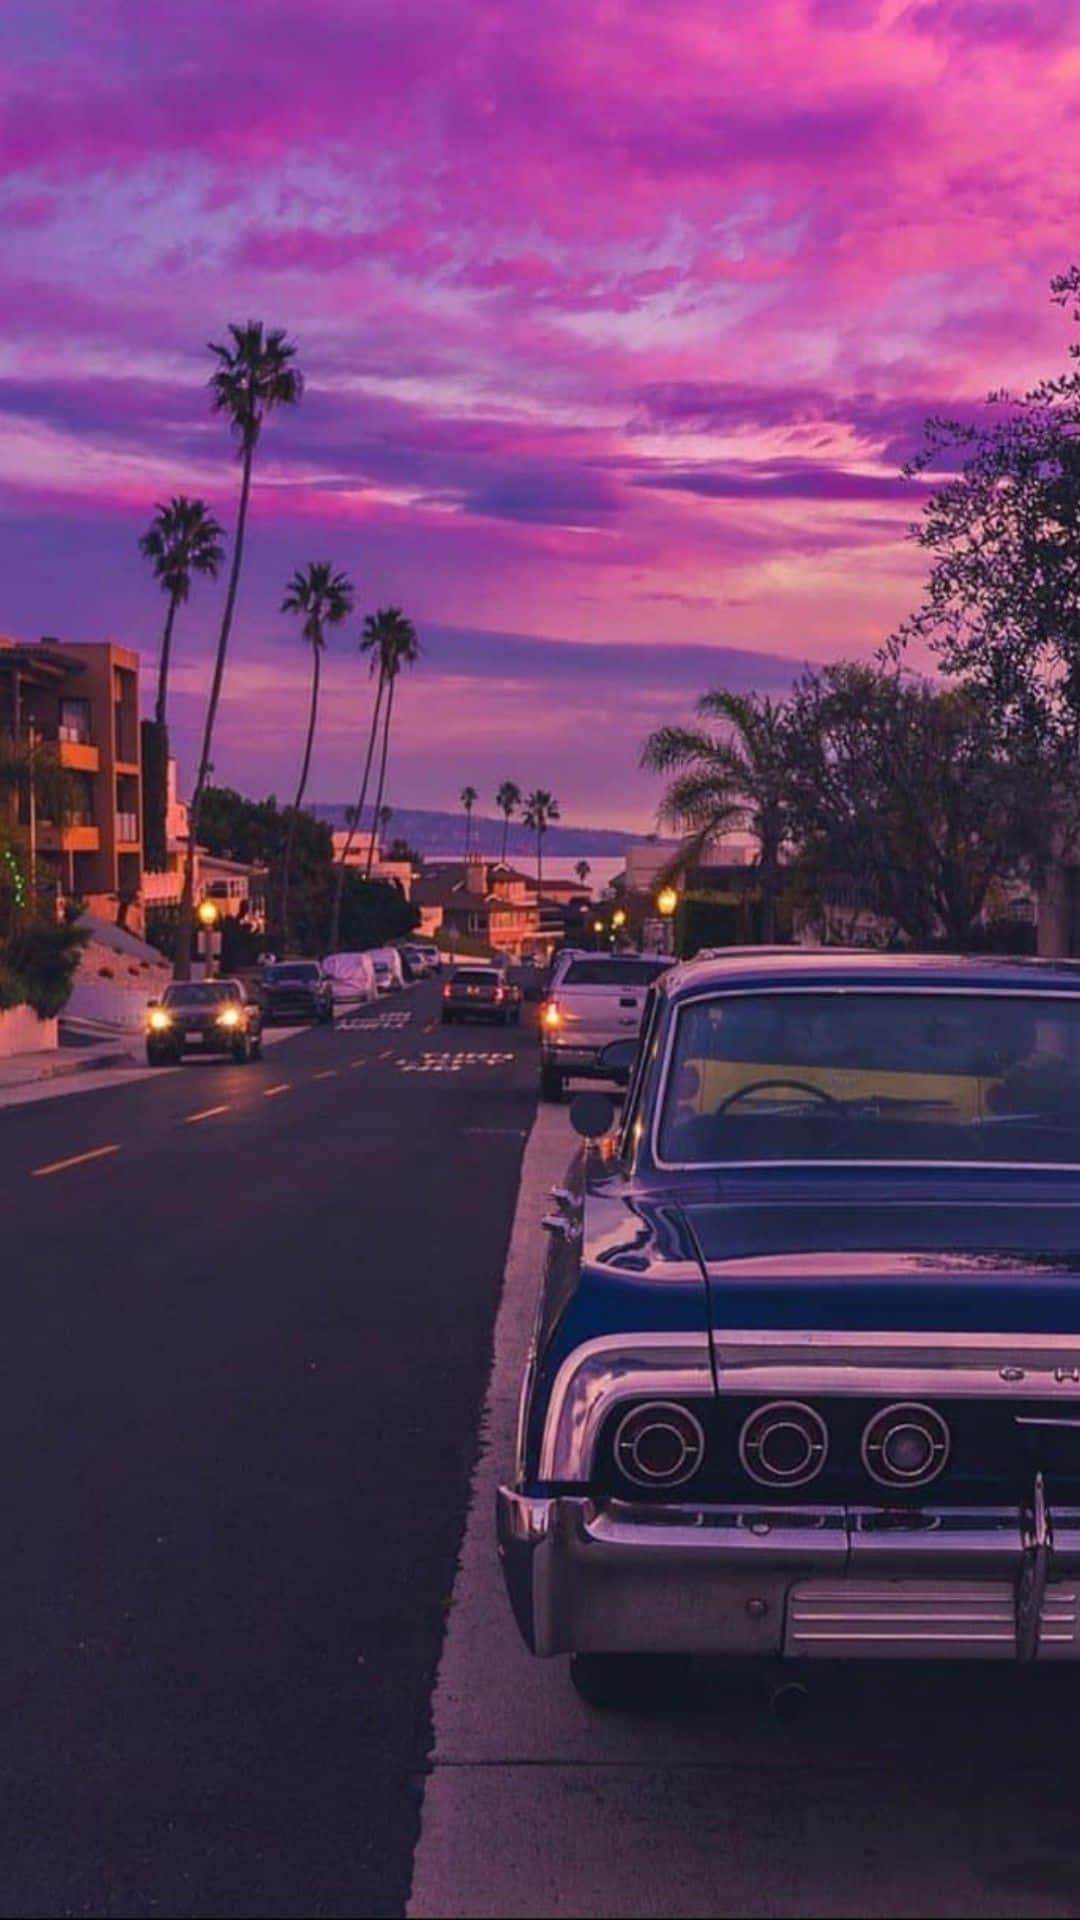 A Classic Car Parked On The Street At Sunset Background